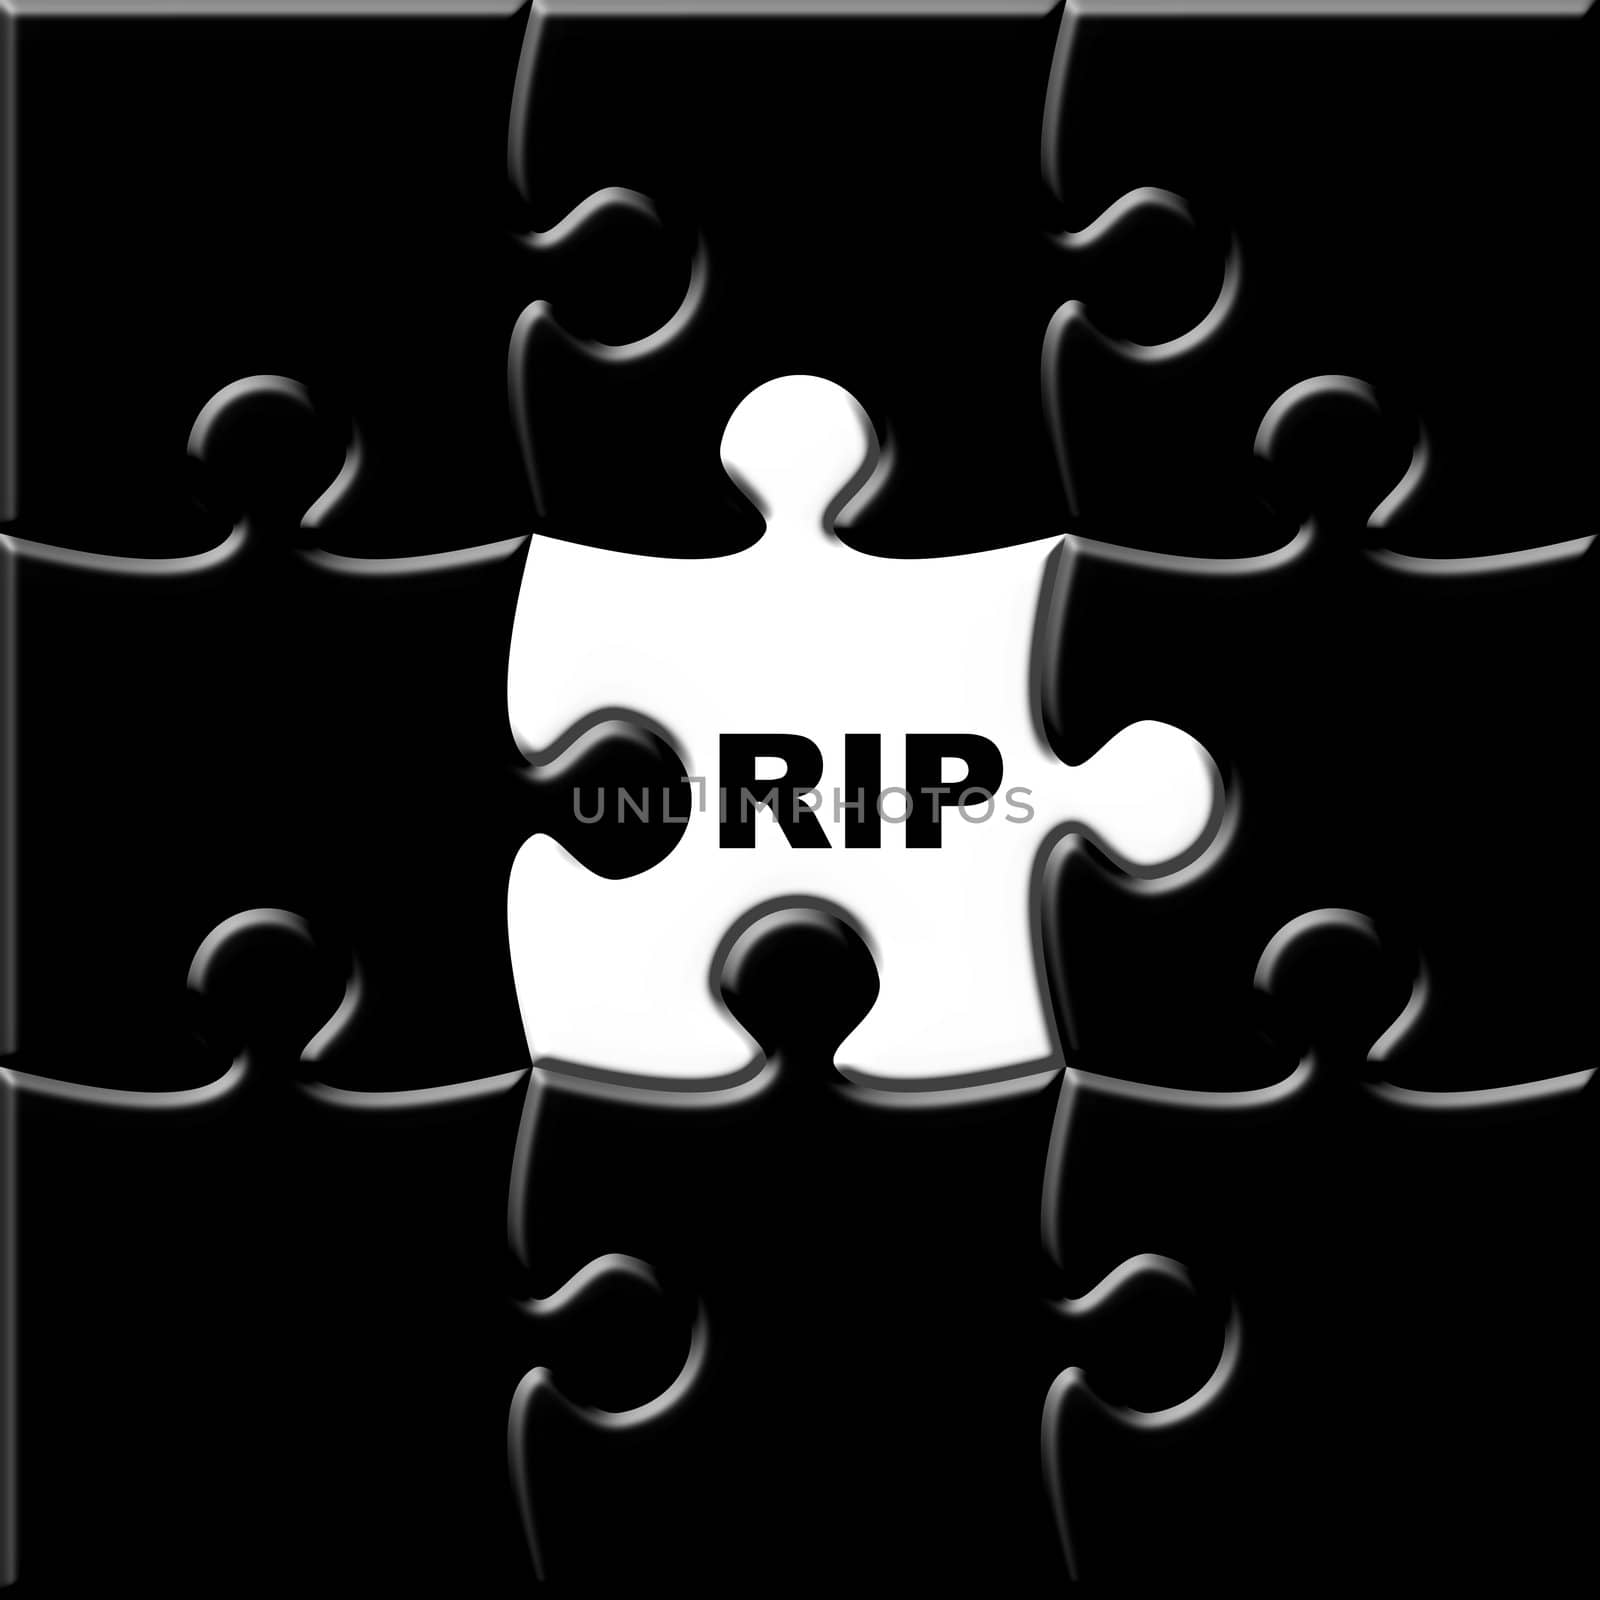 Black puzzle with missing piece representing the deceased